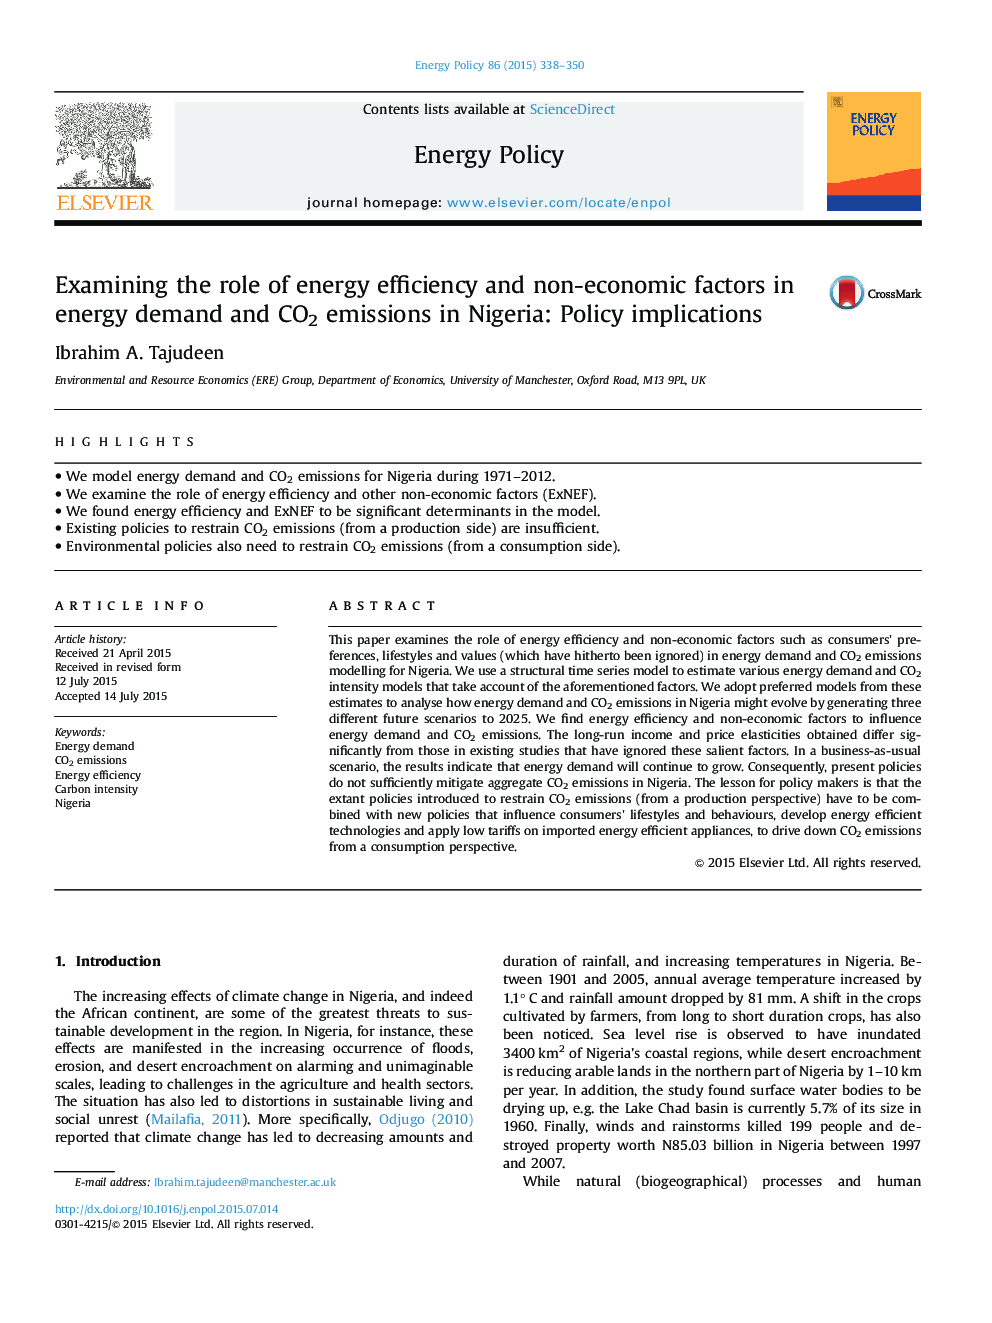 Examining the role of energy efficiency and non-economic factors in energy demand and CO2 emissions in Nigeria: Policy implications